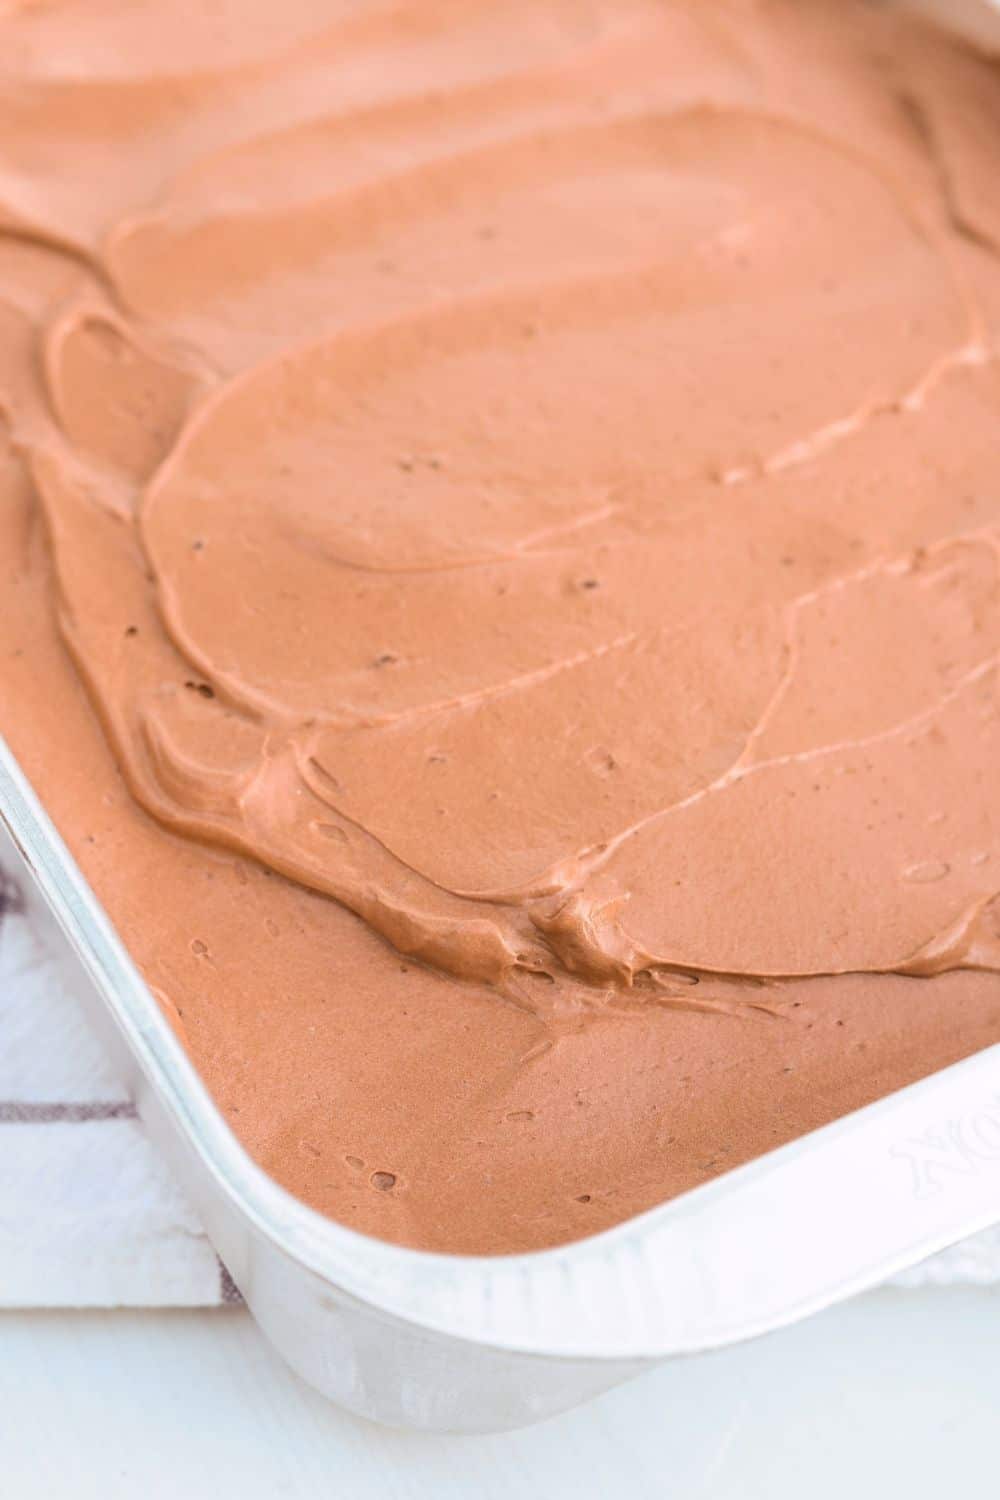 close-up view of chocolate Dream Whip frosting spread over a Dream Whip cake